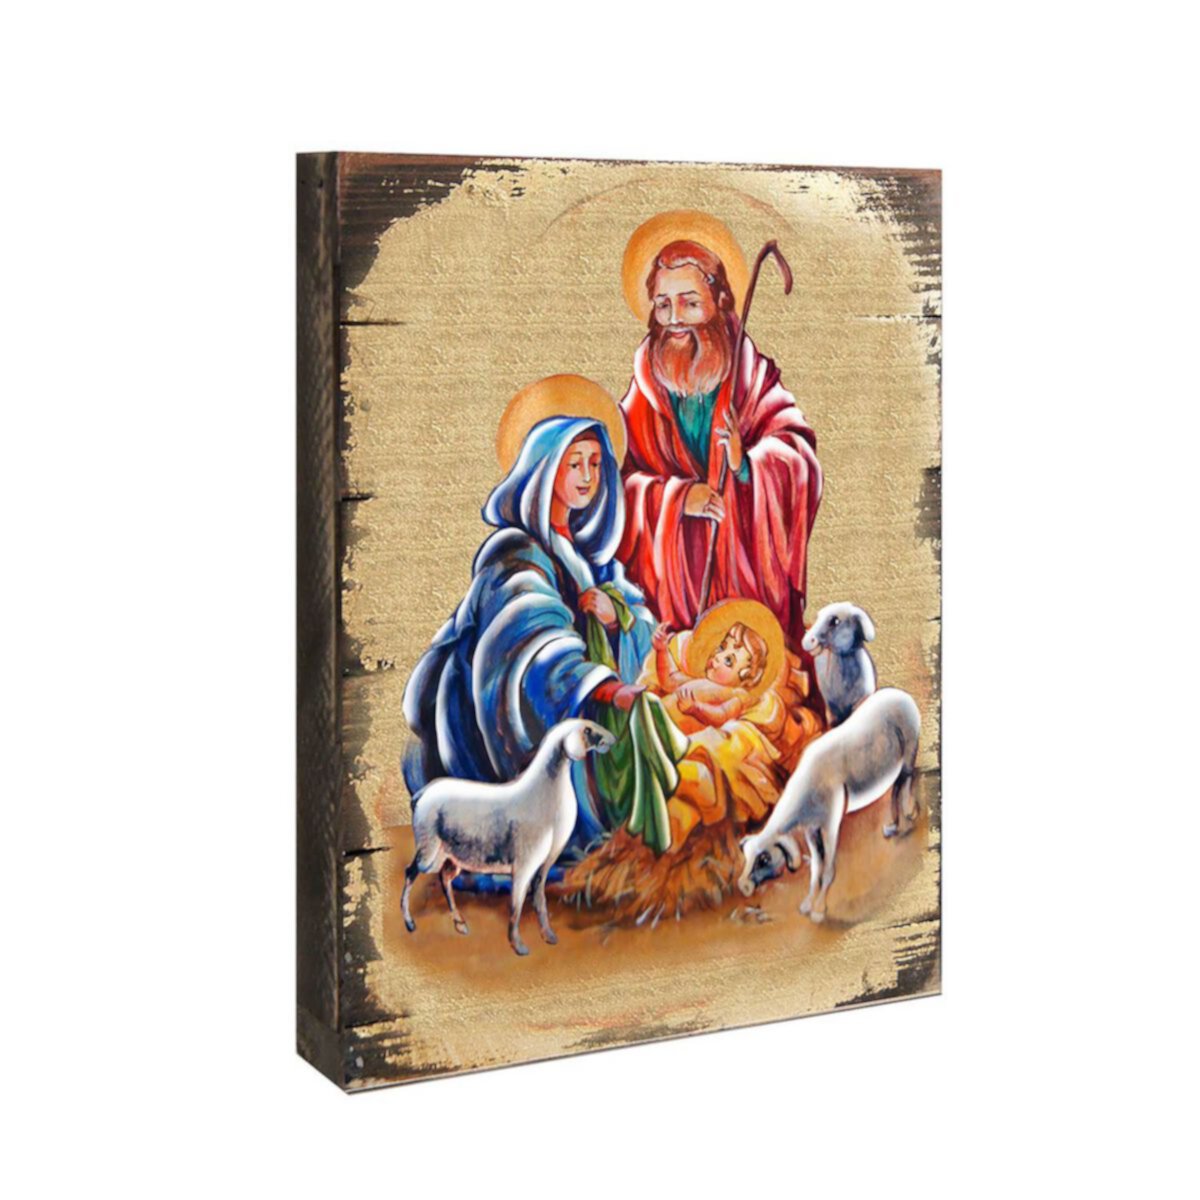 G.Debrekht Holy Family Wooden Gold Plated Religious Christian Sacred Icon Inspirational Icon Décor G.DeBrekht